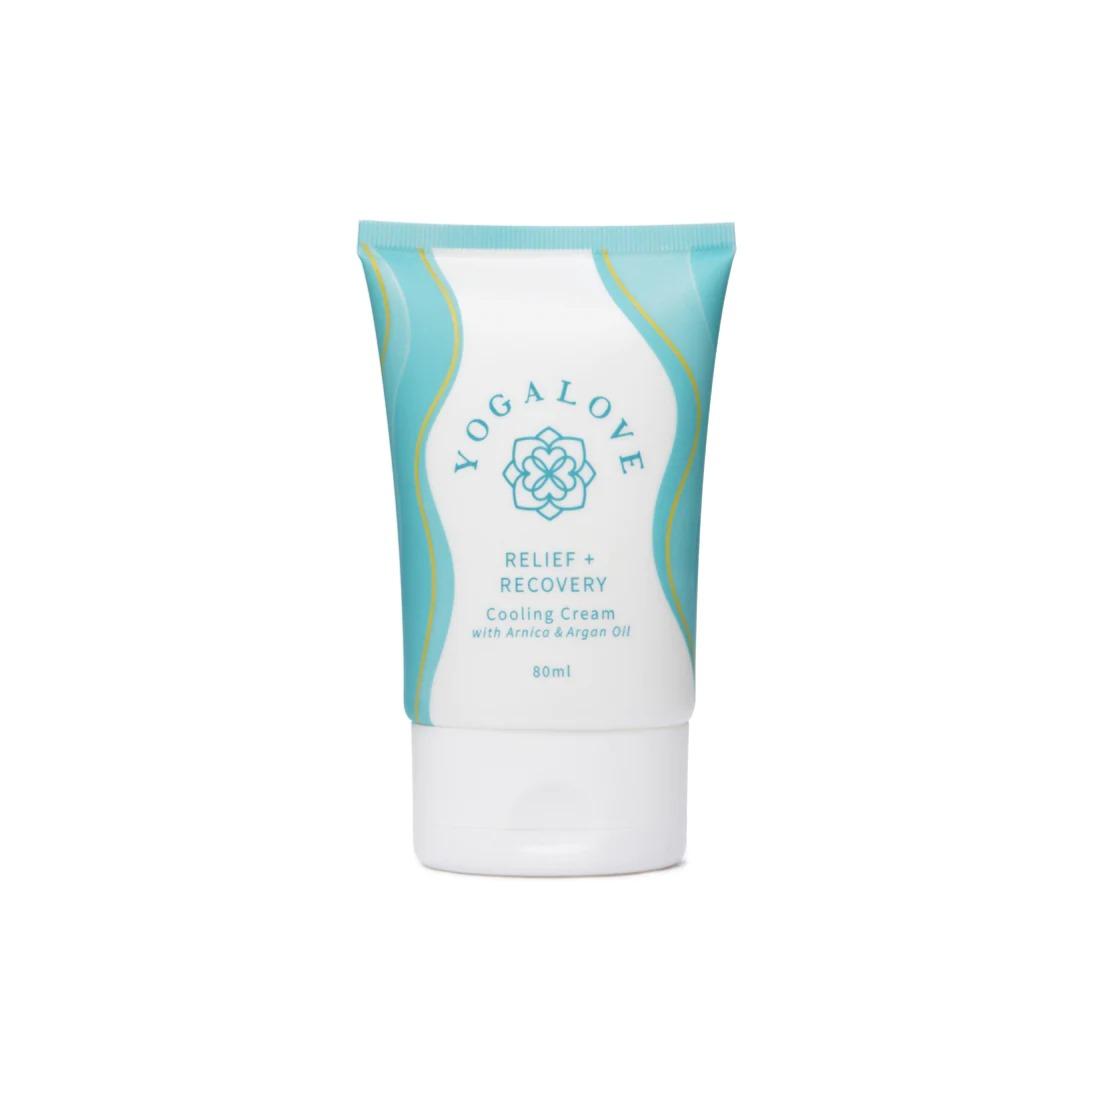 YogaLove Relief + Recovery Cooling Cream